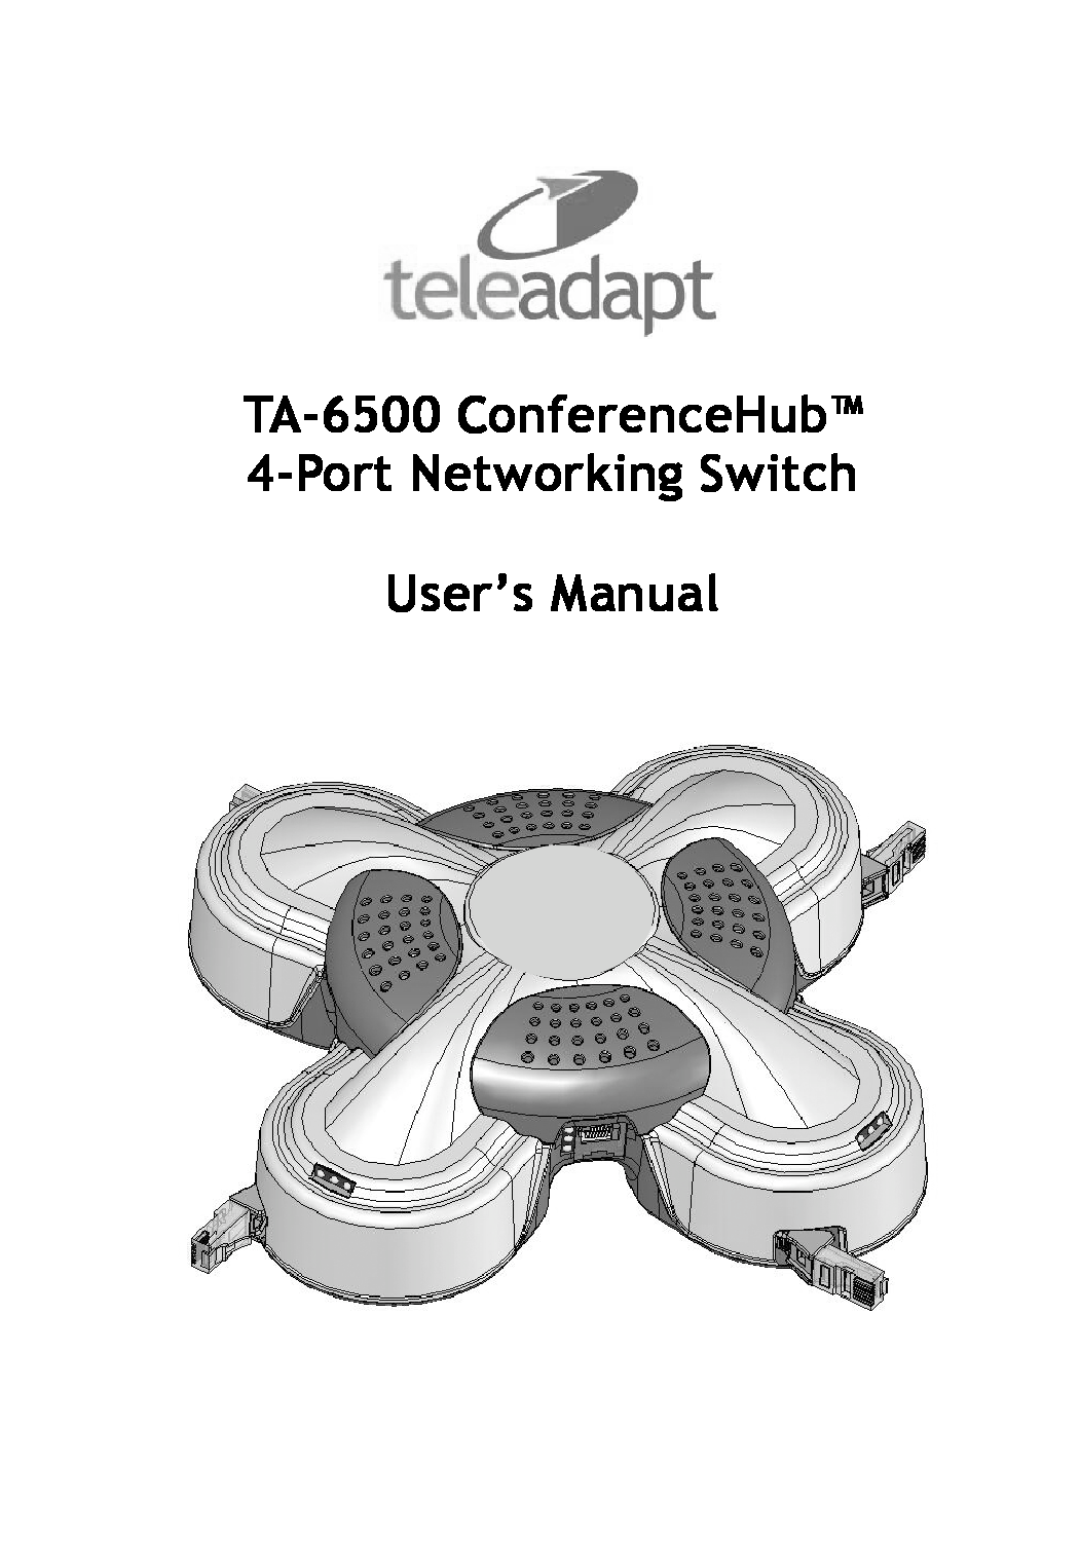 TeleAdapt user manual User’s Manual, TA-6500 ConferenceHub 4-Port Networking Switch 